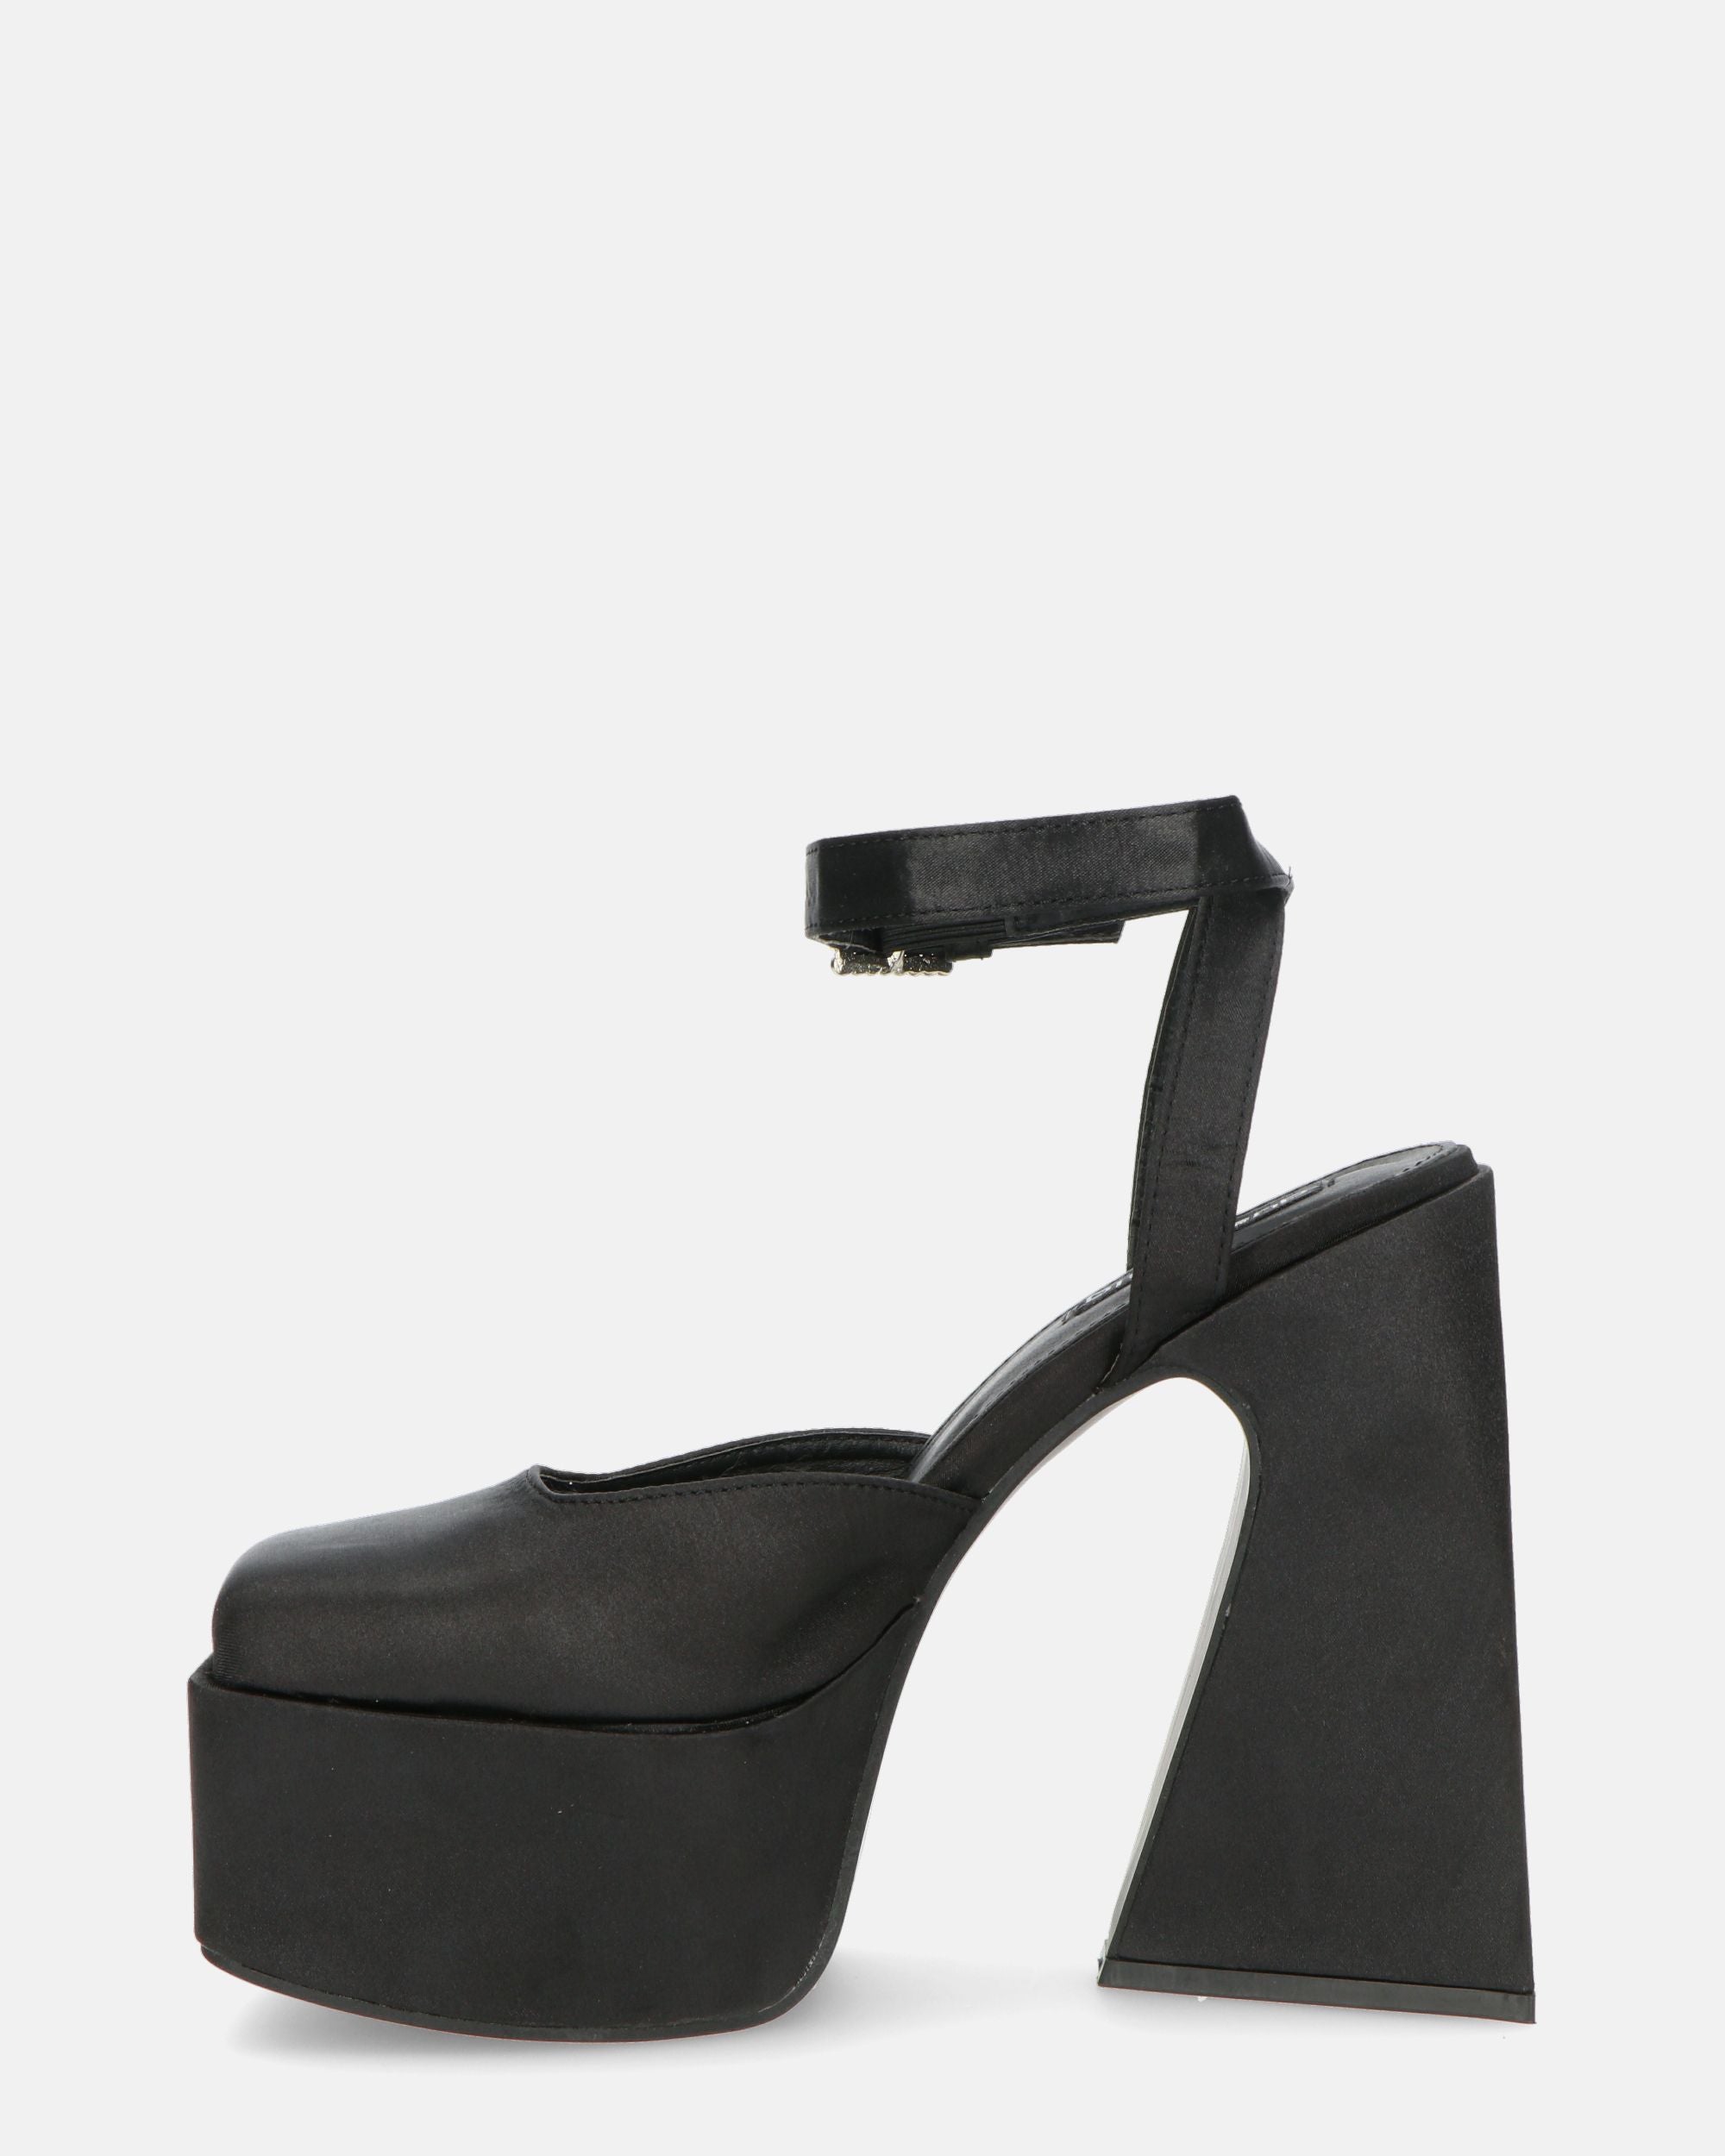 ELEANOR - black closed toe shoes with heel and strap